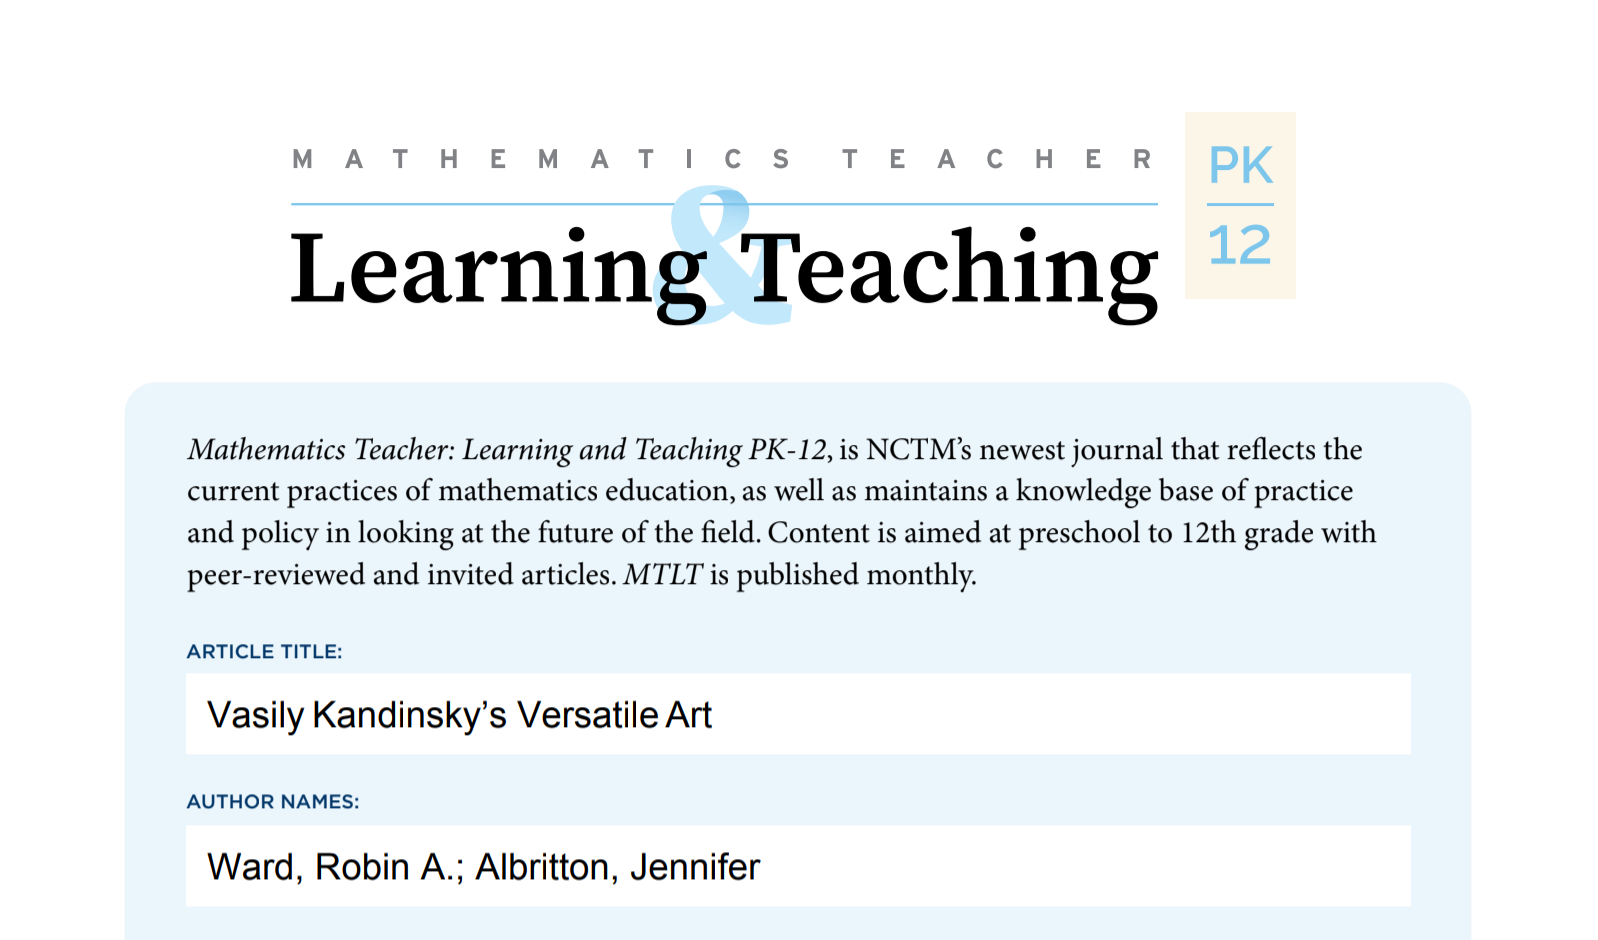 Mathematics Teacher: Learning and Teaching PK-12, is NCTM’s newest journal that reflects the current practices of mathematics education, as well as maintains a knowledge base of practice and policy in looking at the future of the field. Content is aimed at preschool to 12th grade with peer-reviewed and invited articles.